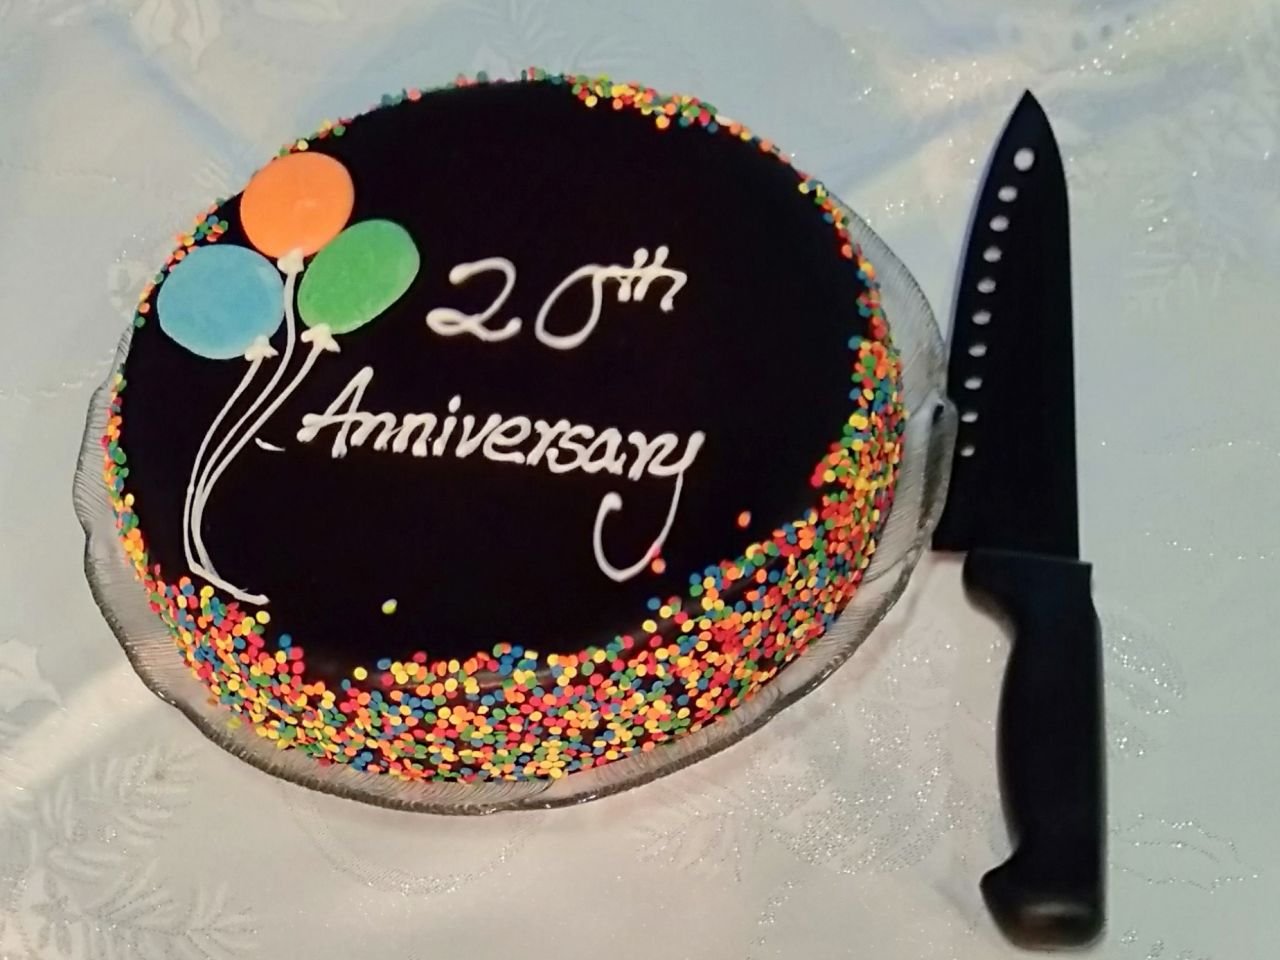 Branch's anniversary cake at our May 2021 meeting